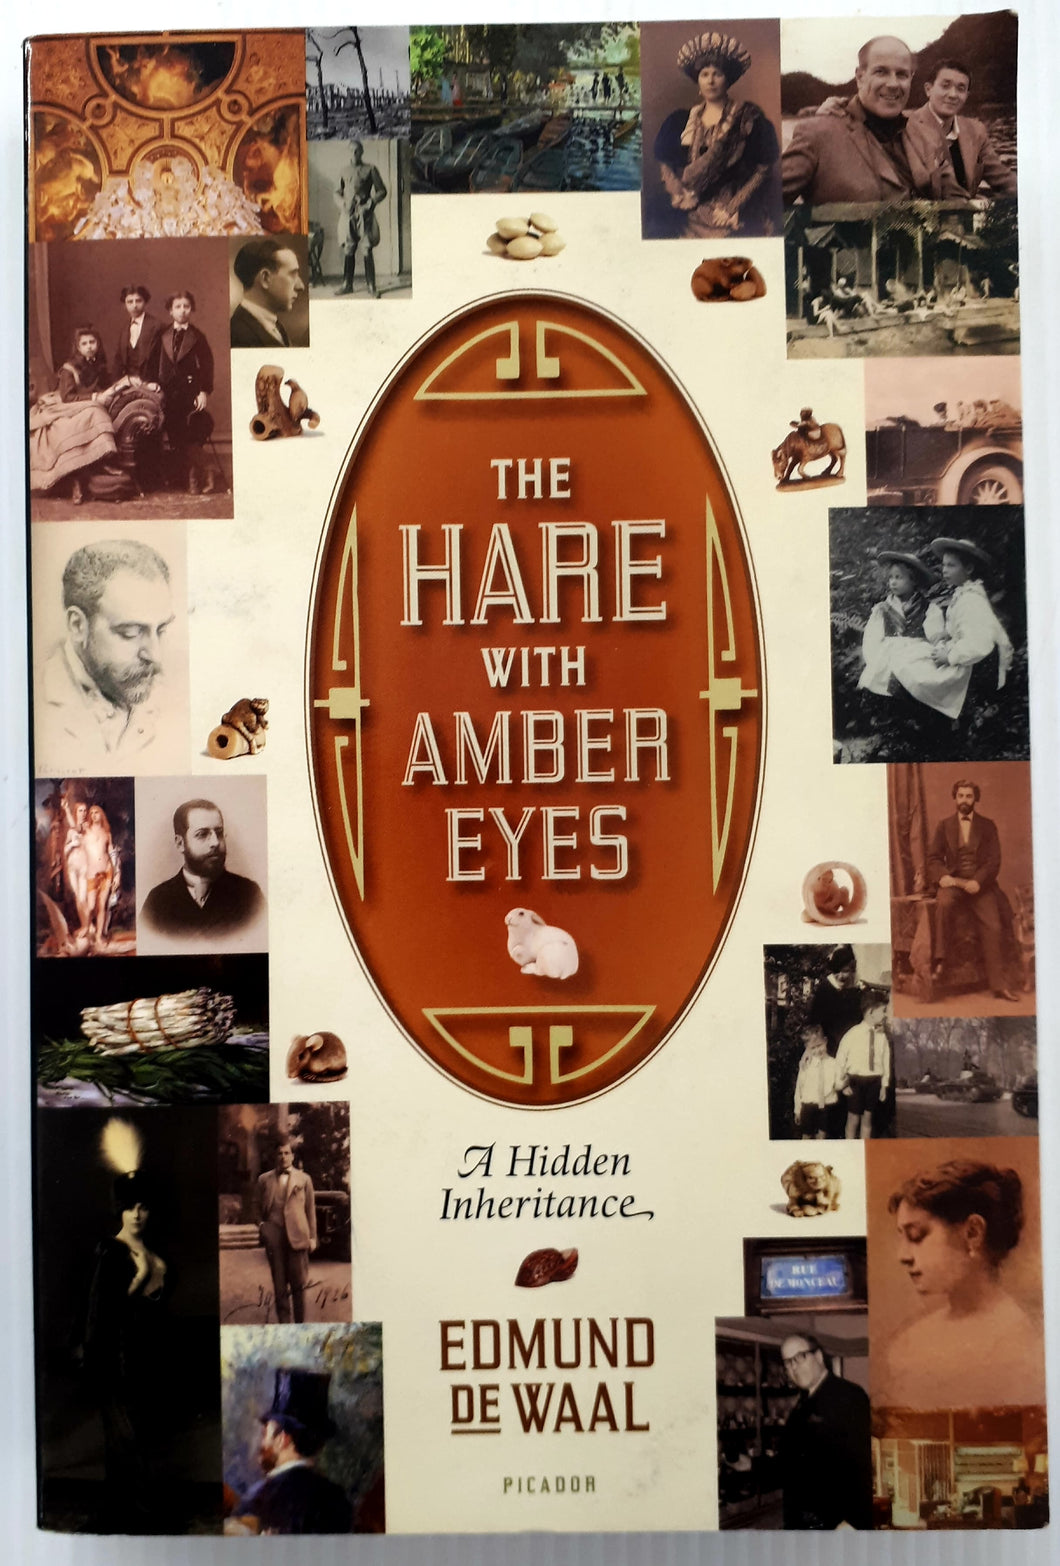 THE HARE WITH AMBER EYES - Edmund de Waal